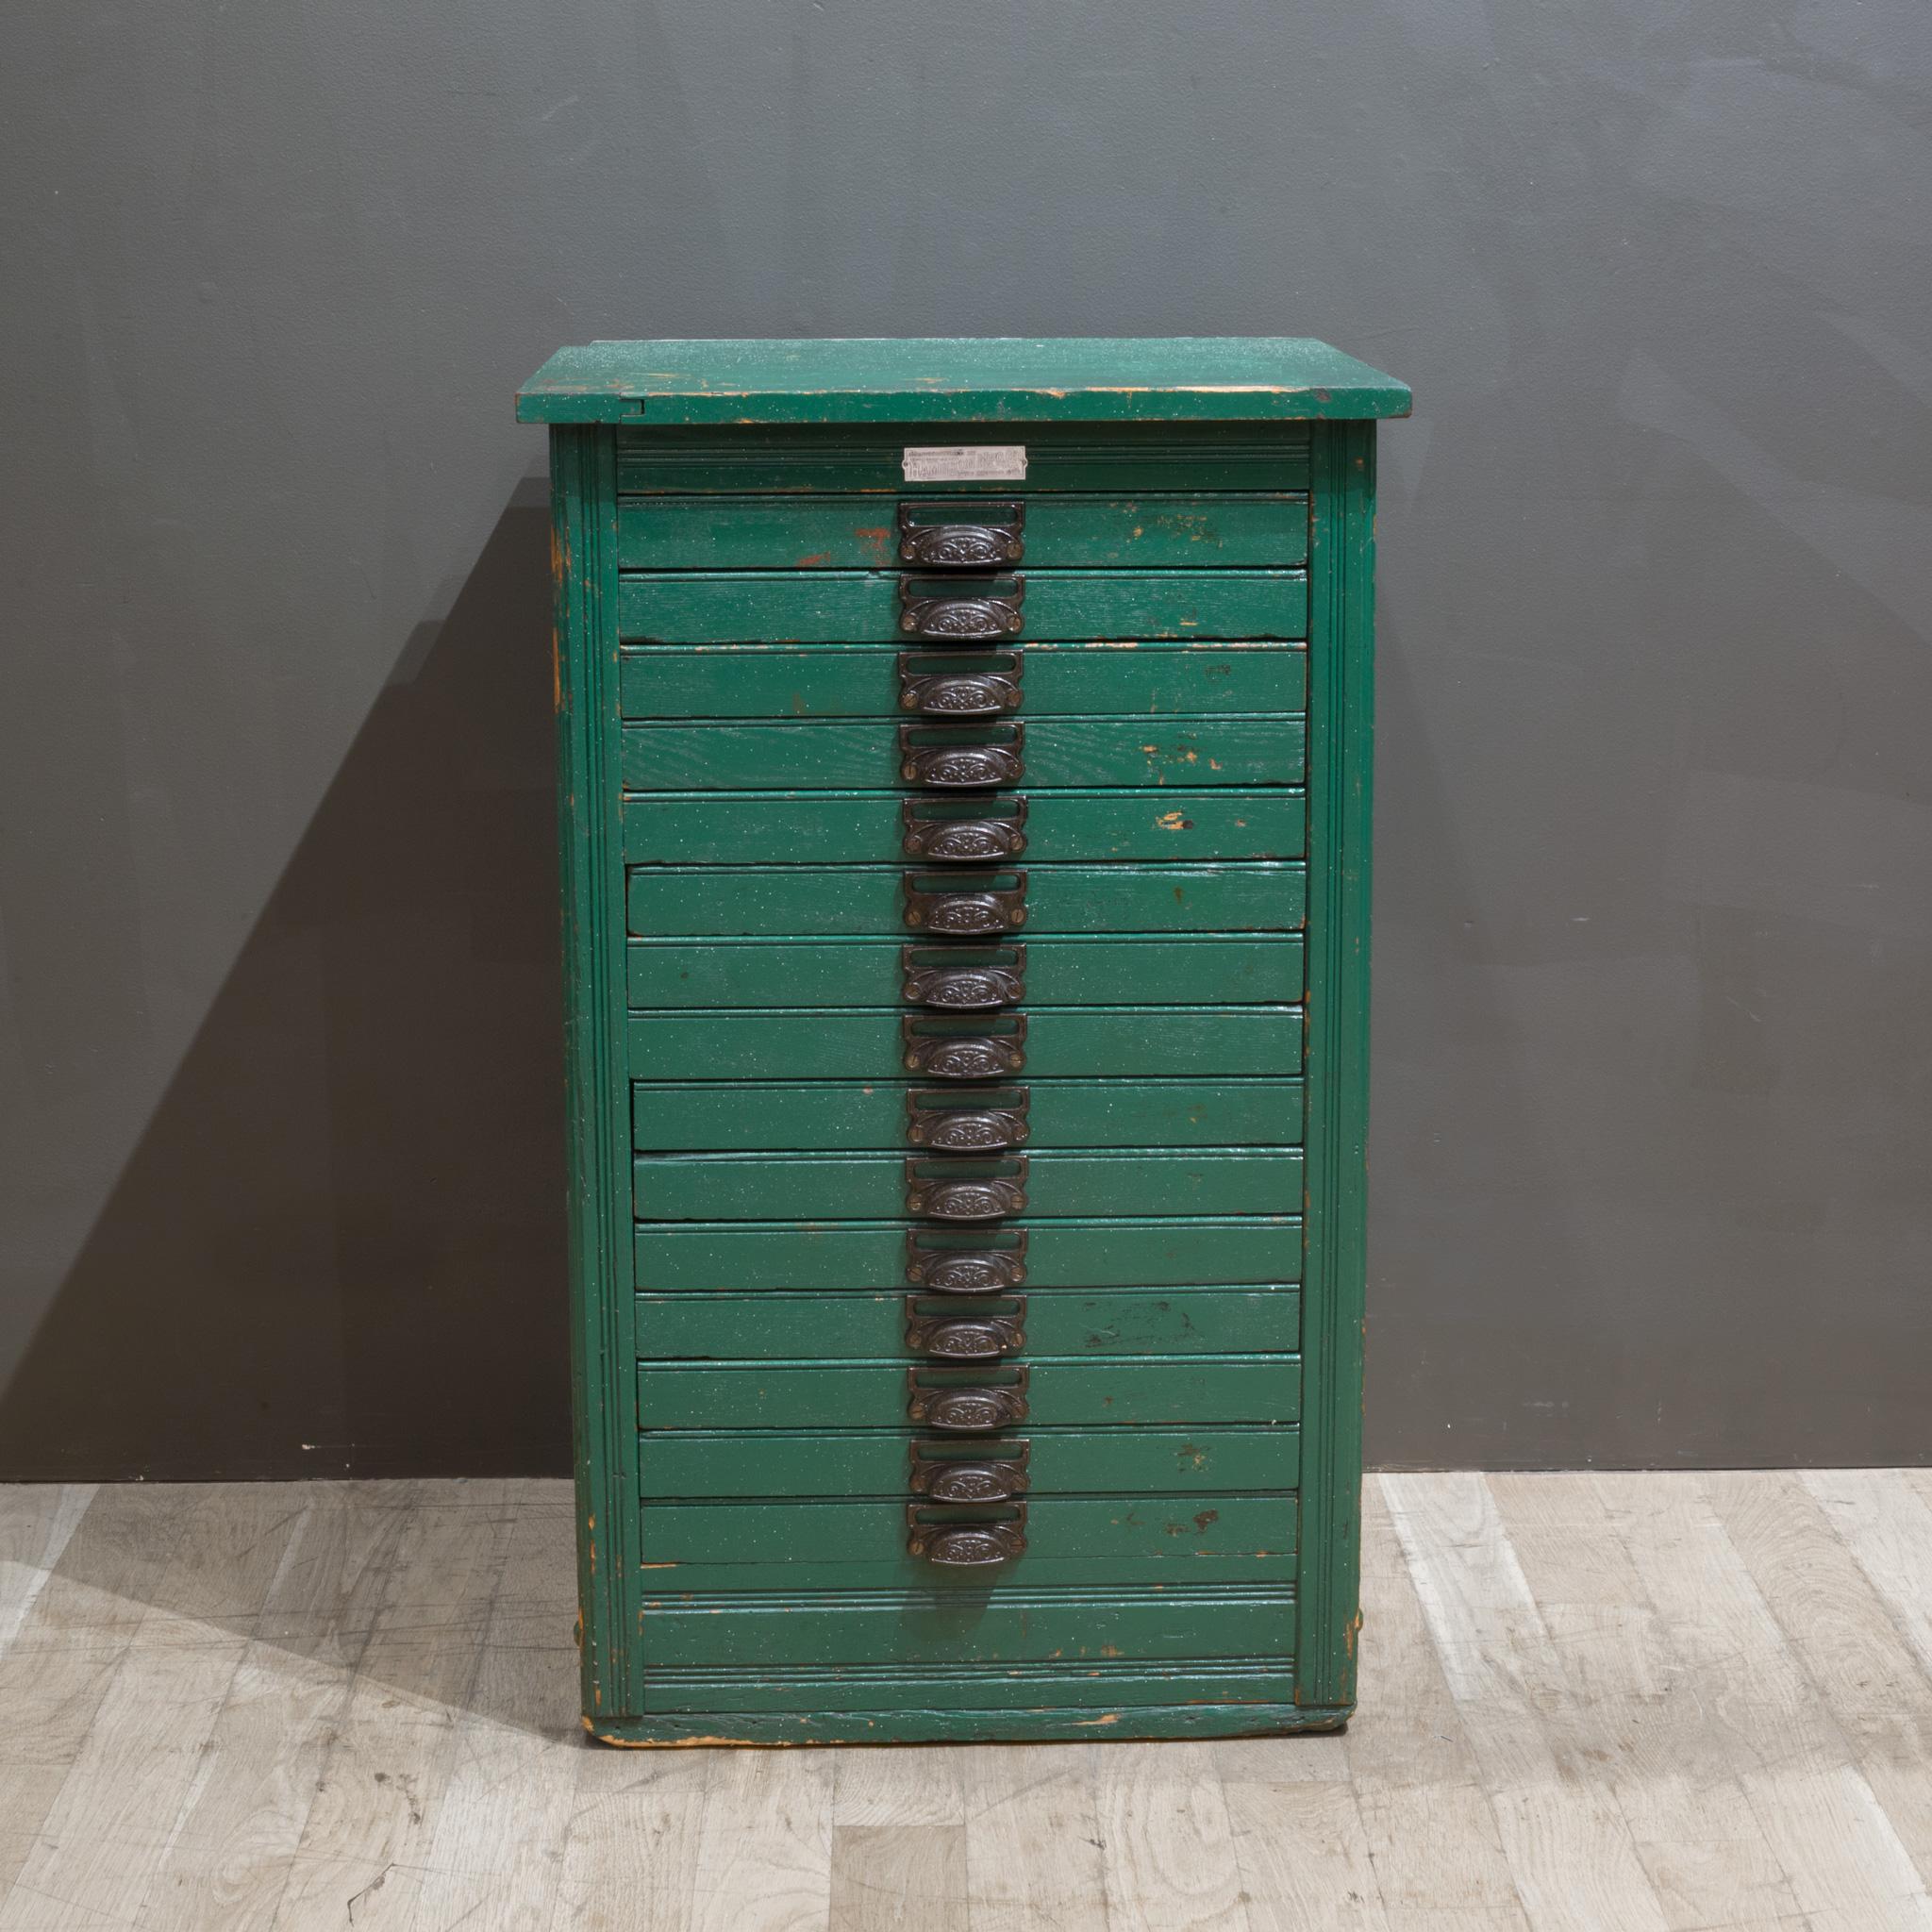 ABOUT

Contact us for more shipping options: S16 Home San Francisco. 

A late 19th century typesetter's cabinet with 15 wooden segmented drawers used to house steel typeset letters. Each drawer has cast iron metal pulls and original 